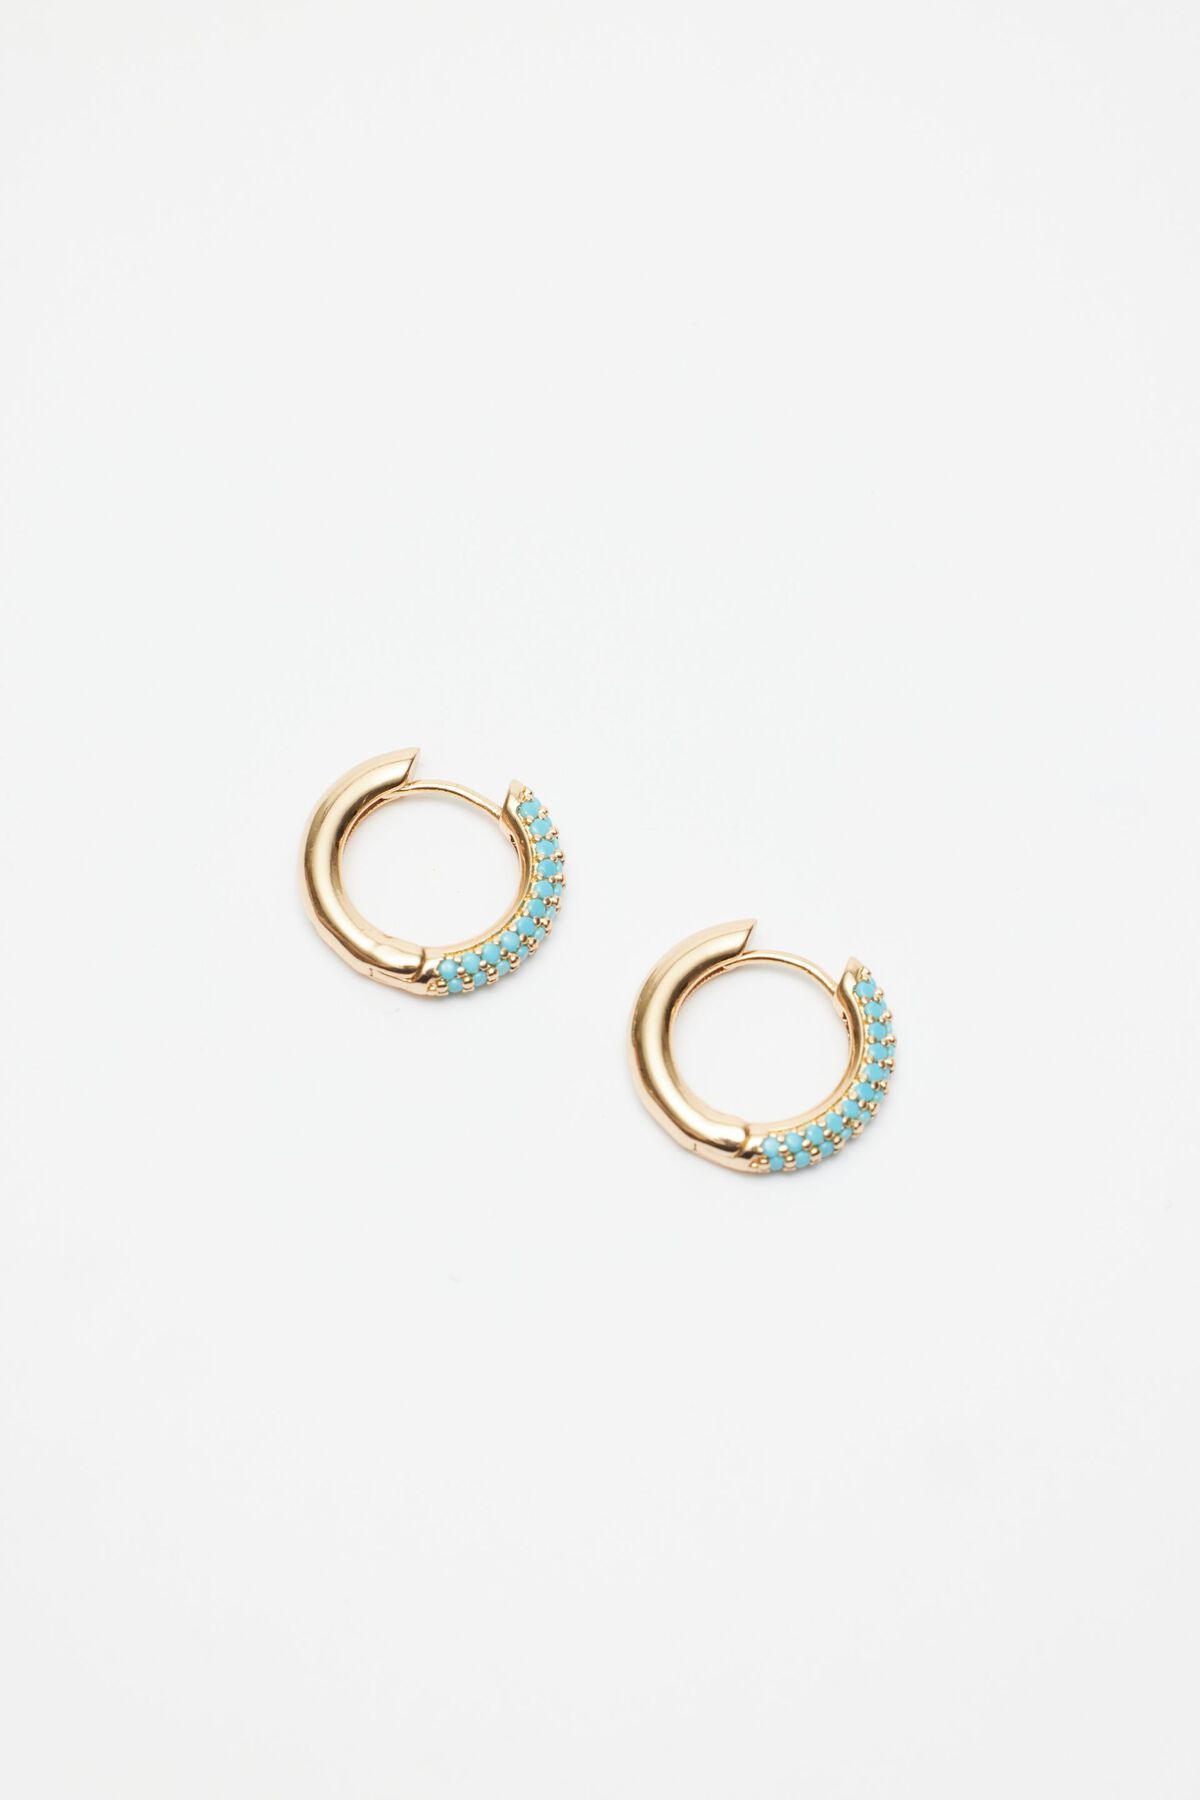 Dynamite Round Pave Hinge Earrings. 3